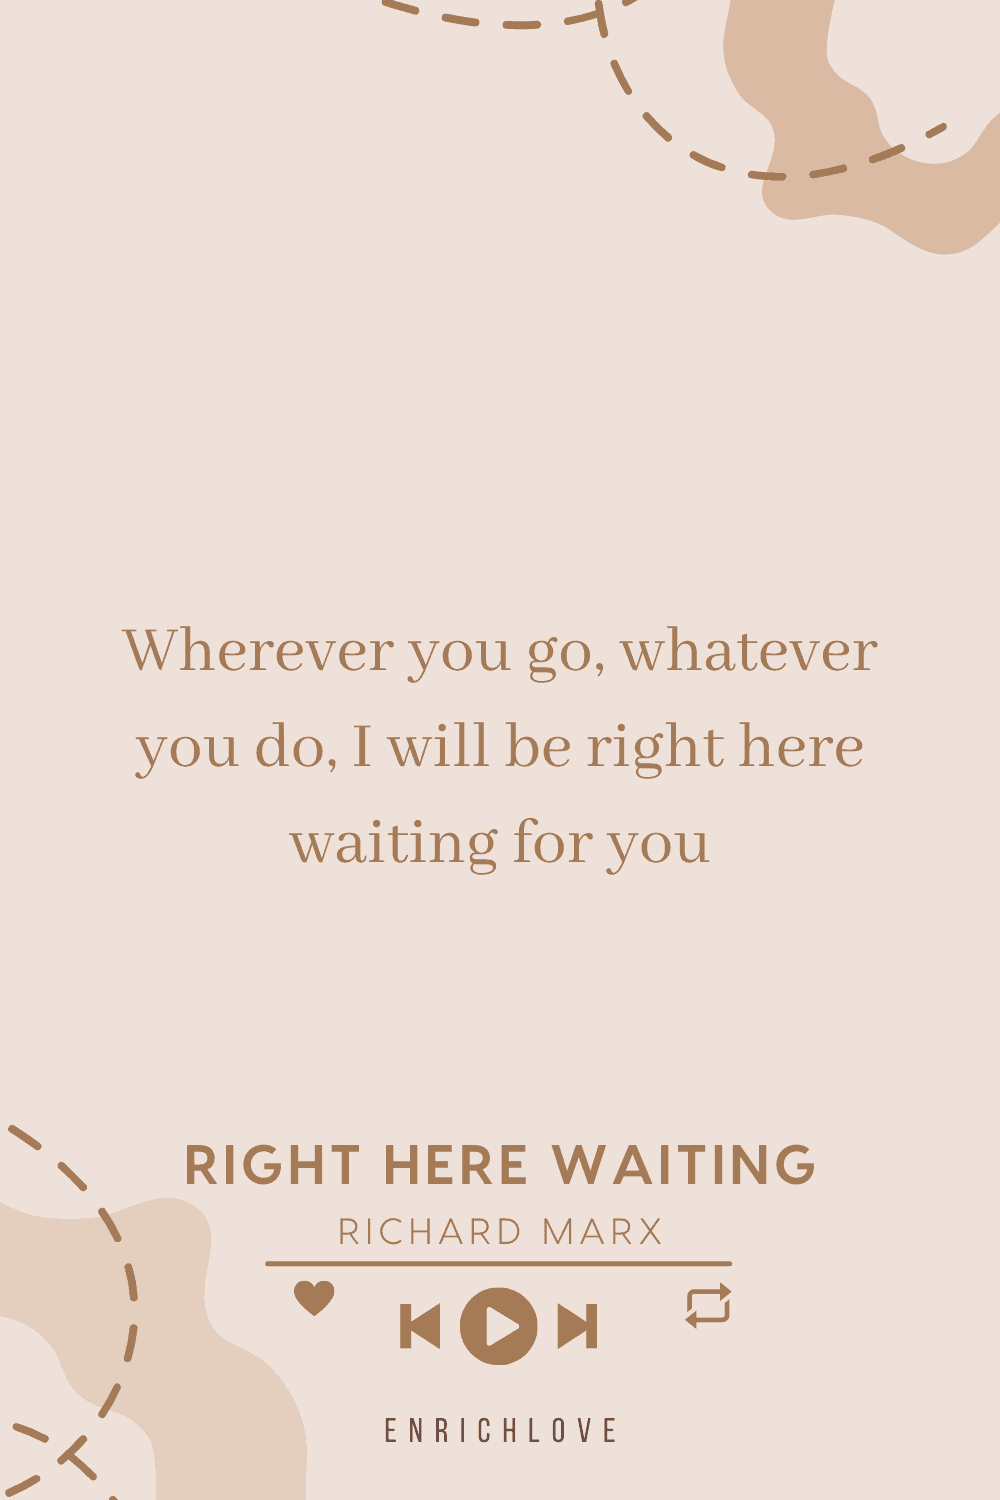 Wherever you go, whatever you do, I will be right here waiting for you